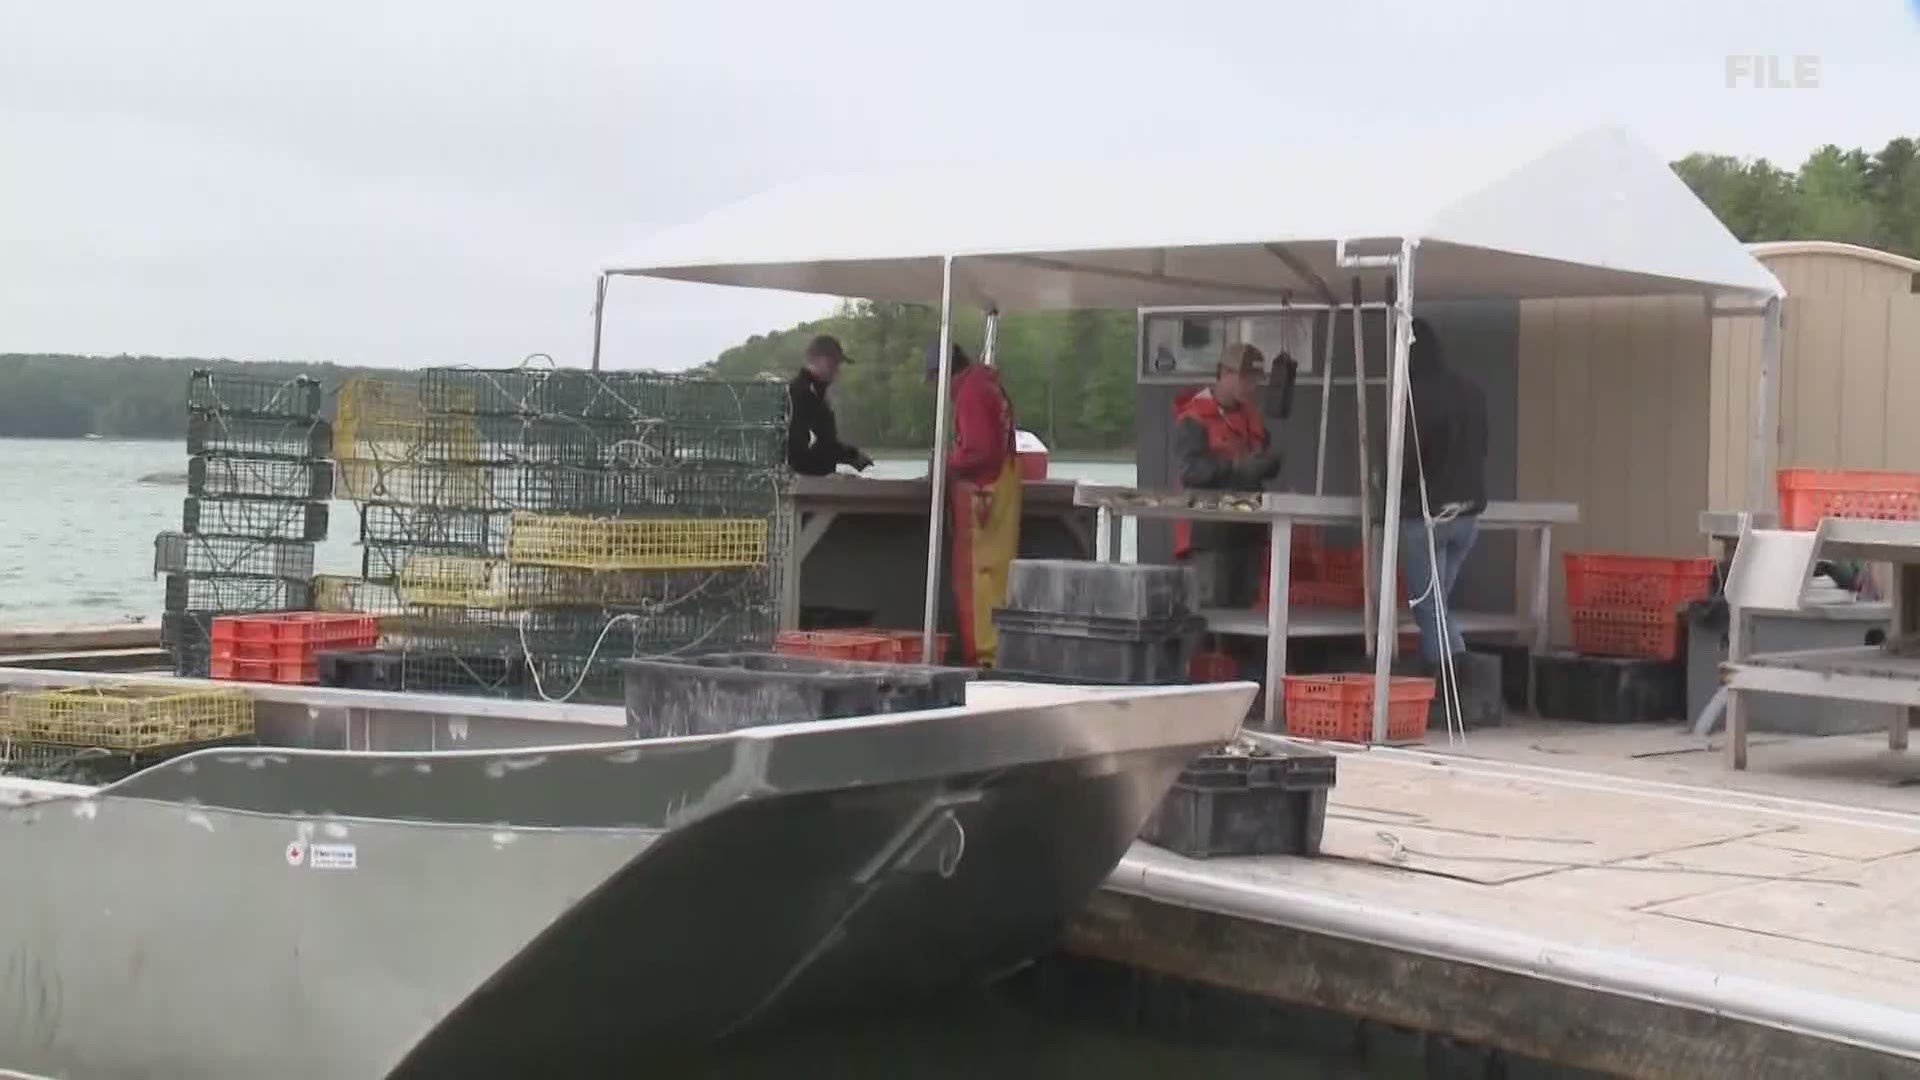 Federal aid and new projects will help Maine's aquaculture industry